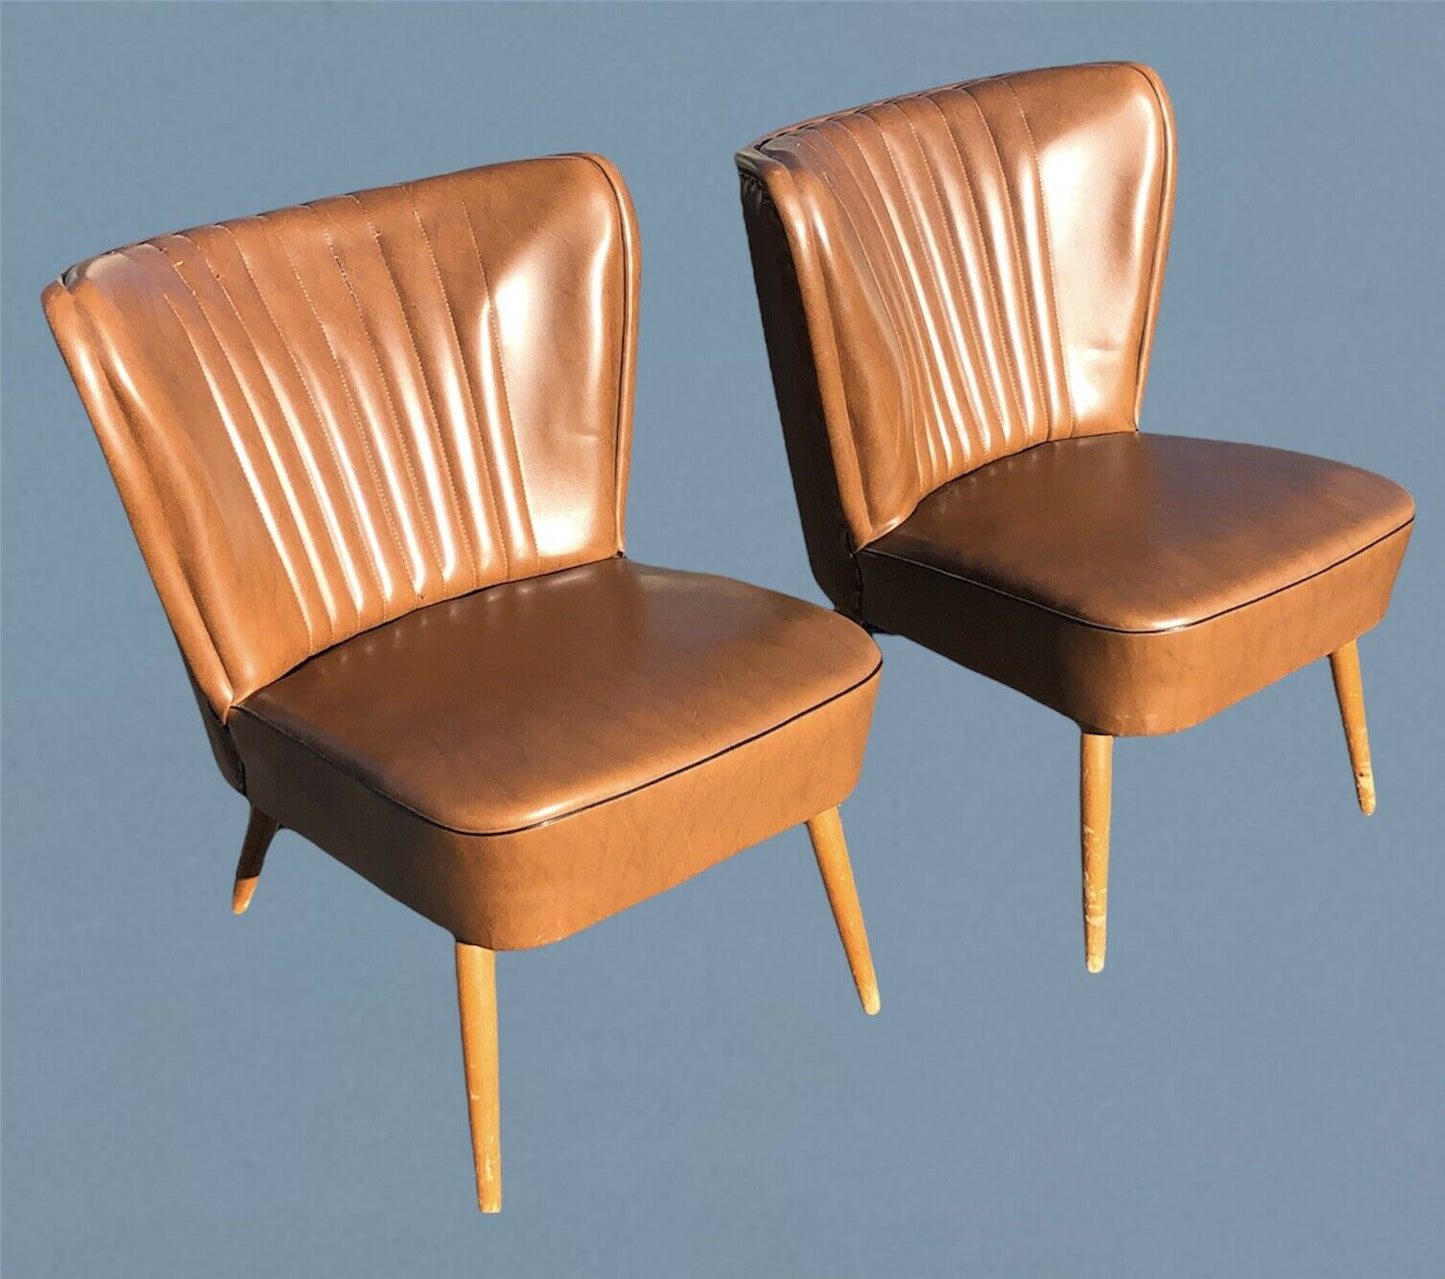 048.....Fabulous Pair Of Original Retro Cocktail Chairs ( sold )